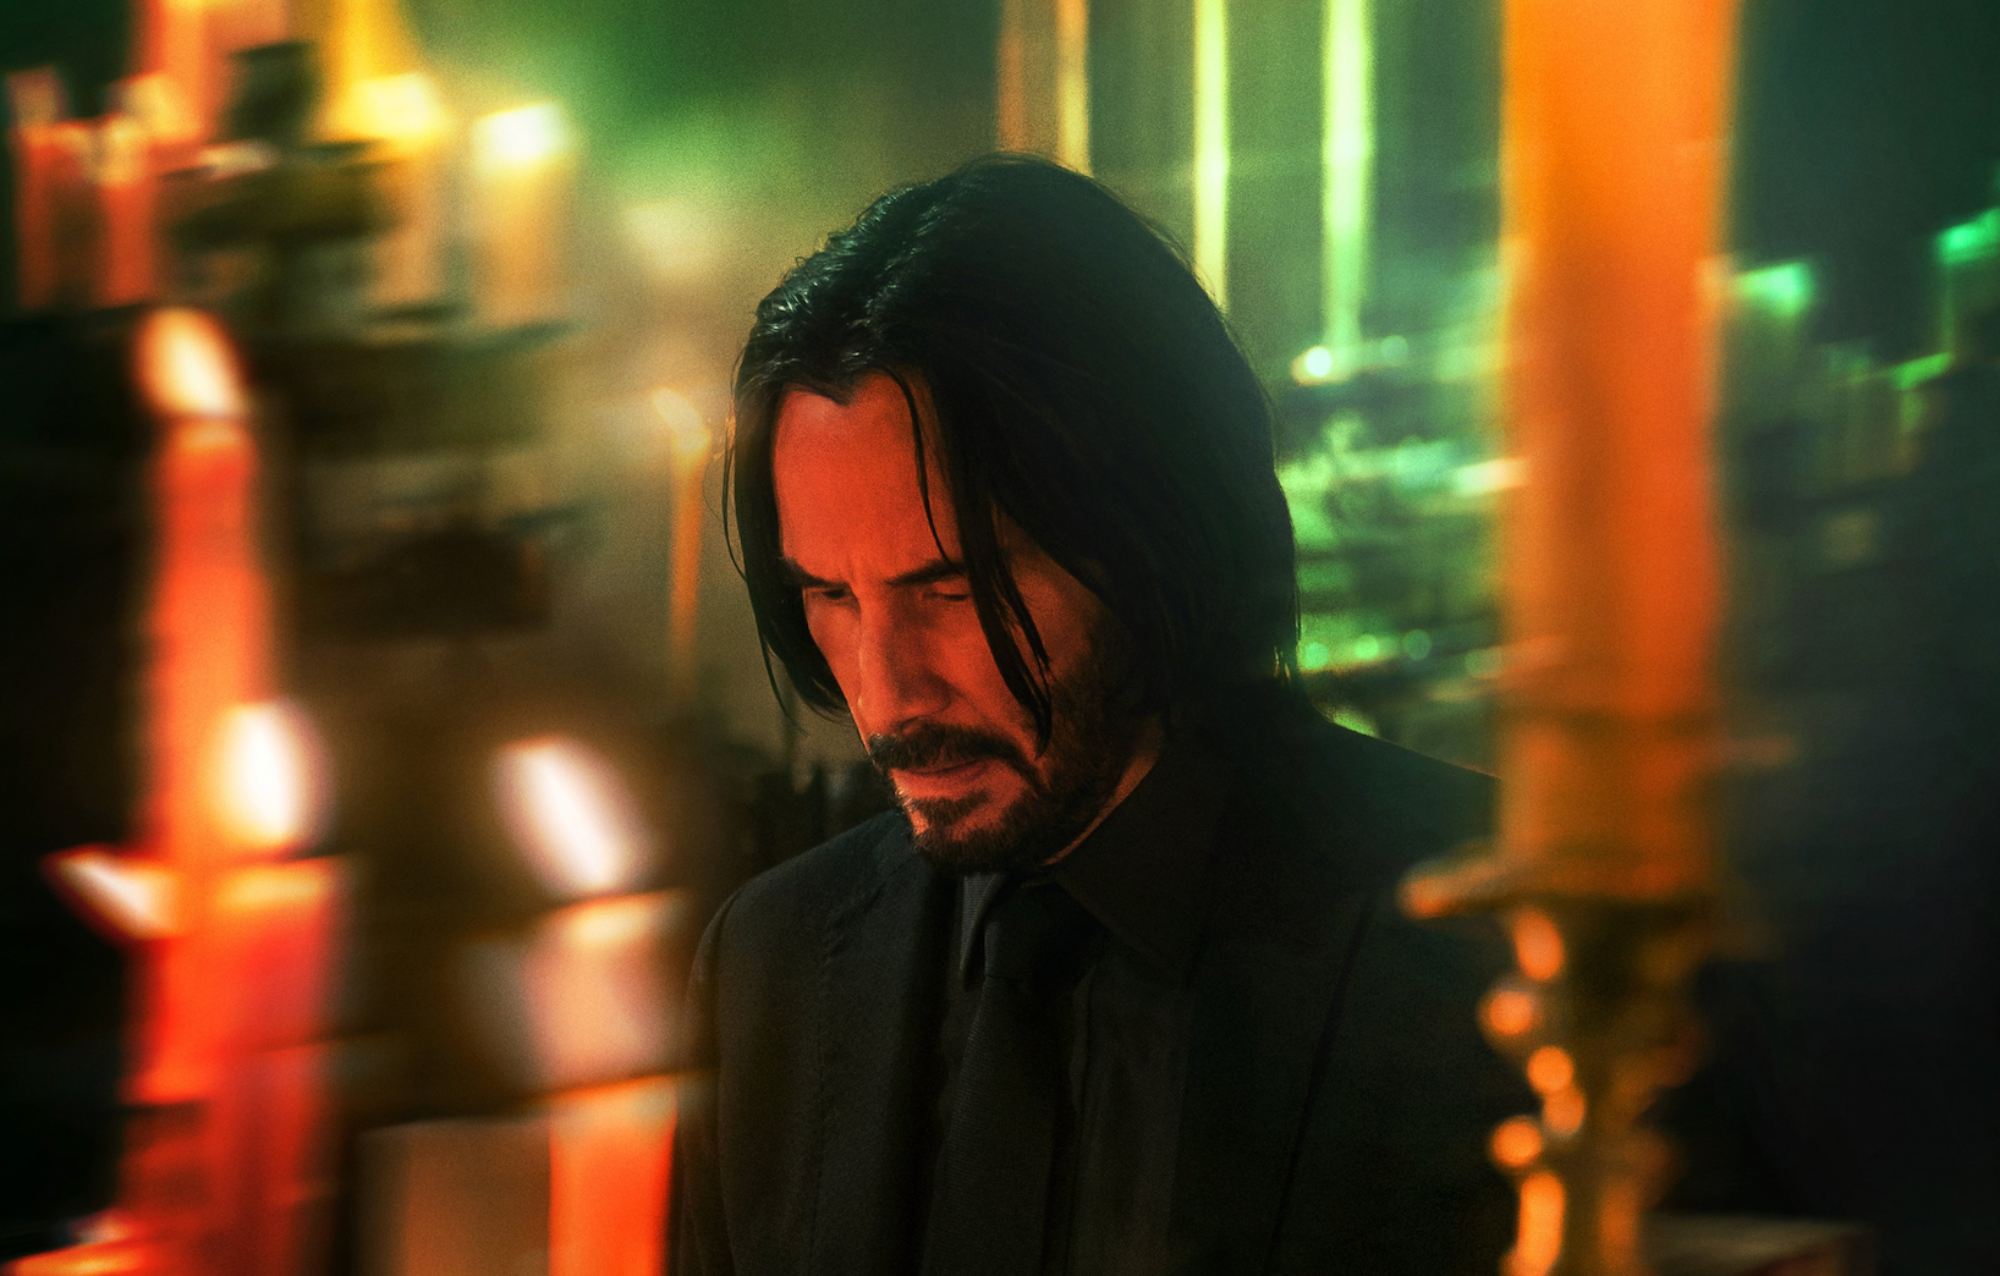 'John Wick: Chapter 4' Keanu Reeves as John Wick with his head hang low, surrounded by candles.